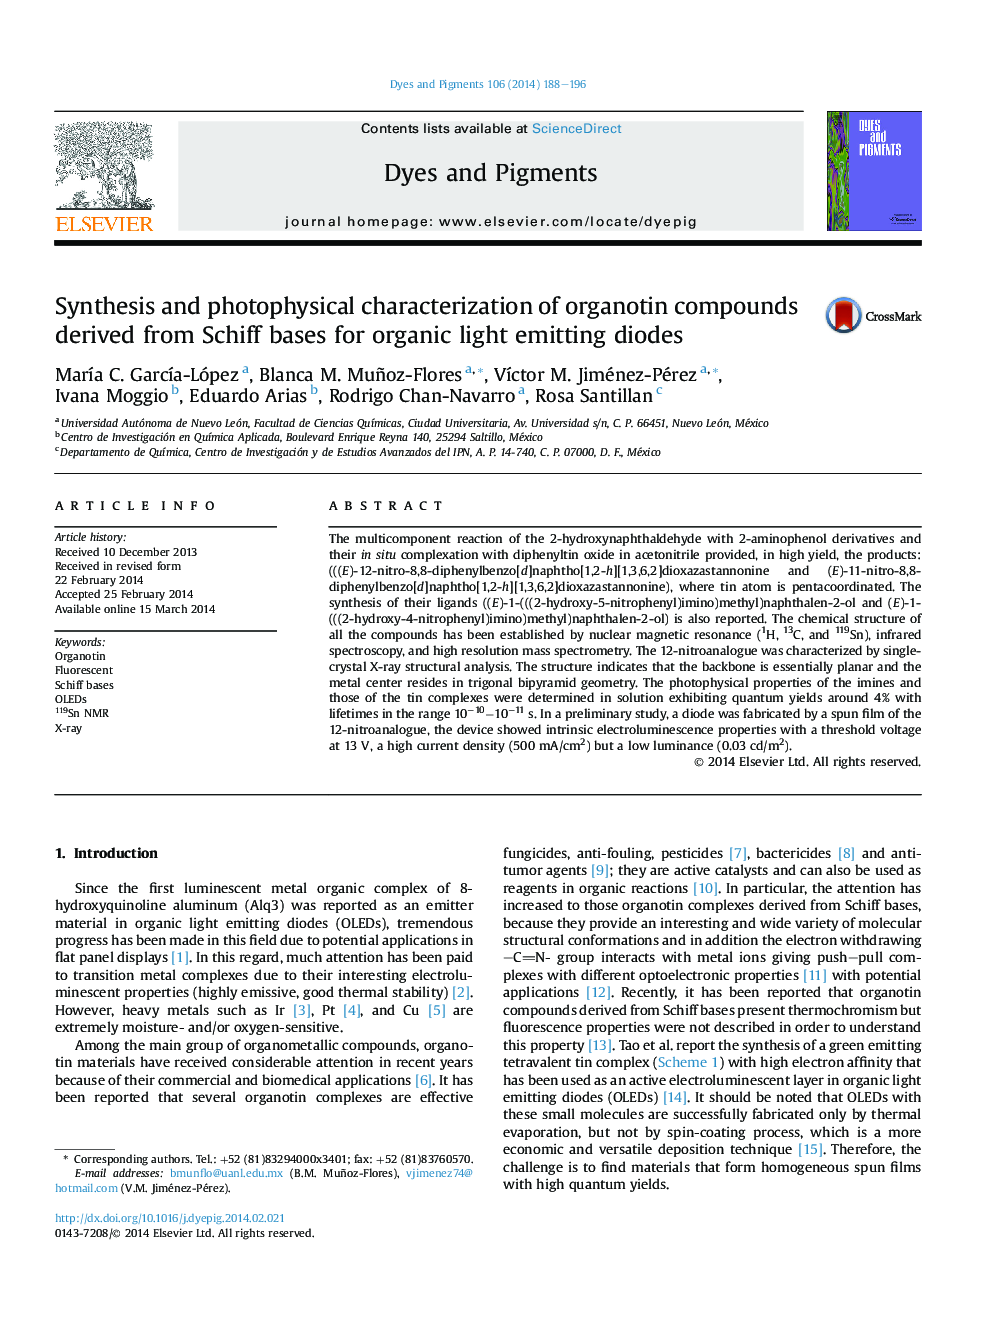 Synthesis and photophysical characterization of organotin compounds derived from Schiff bases for organic light emitting diodes